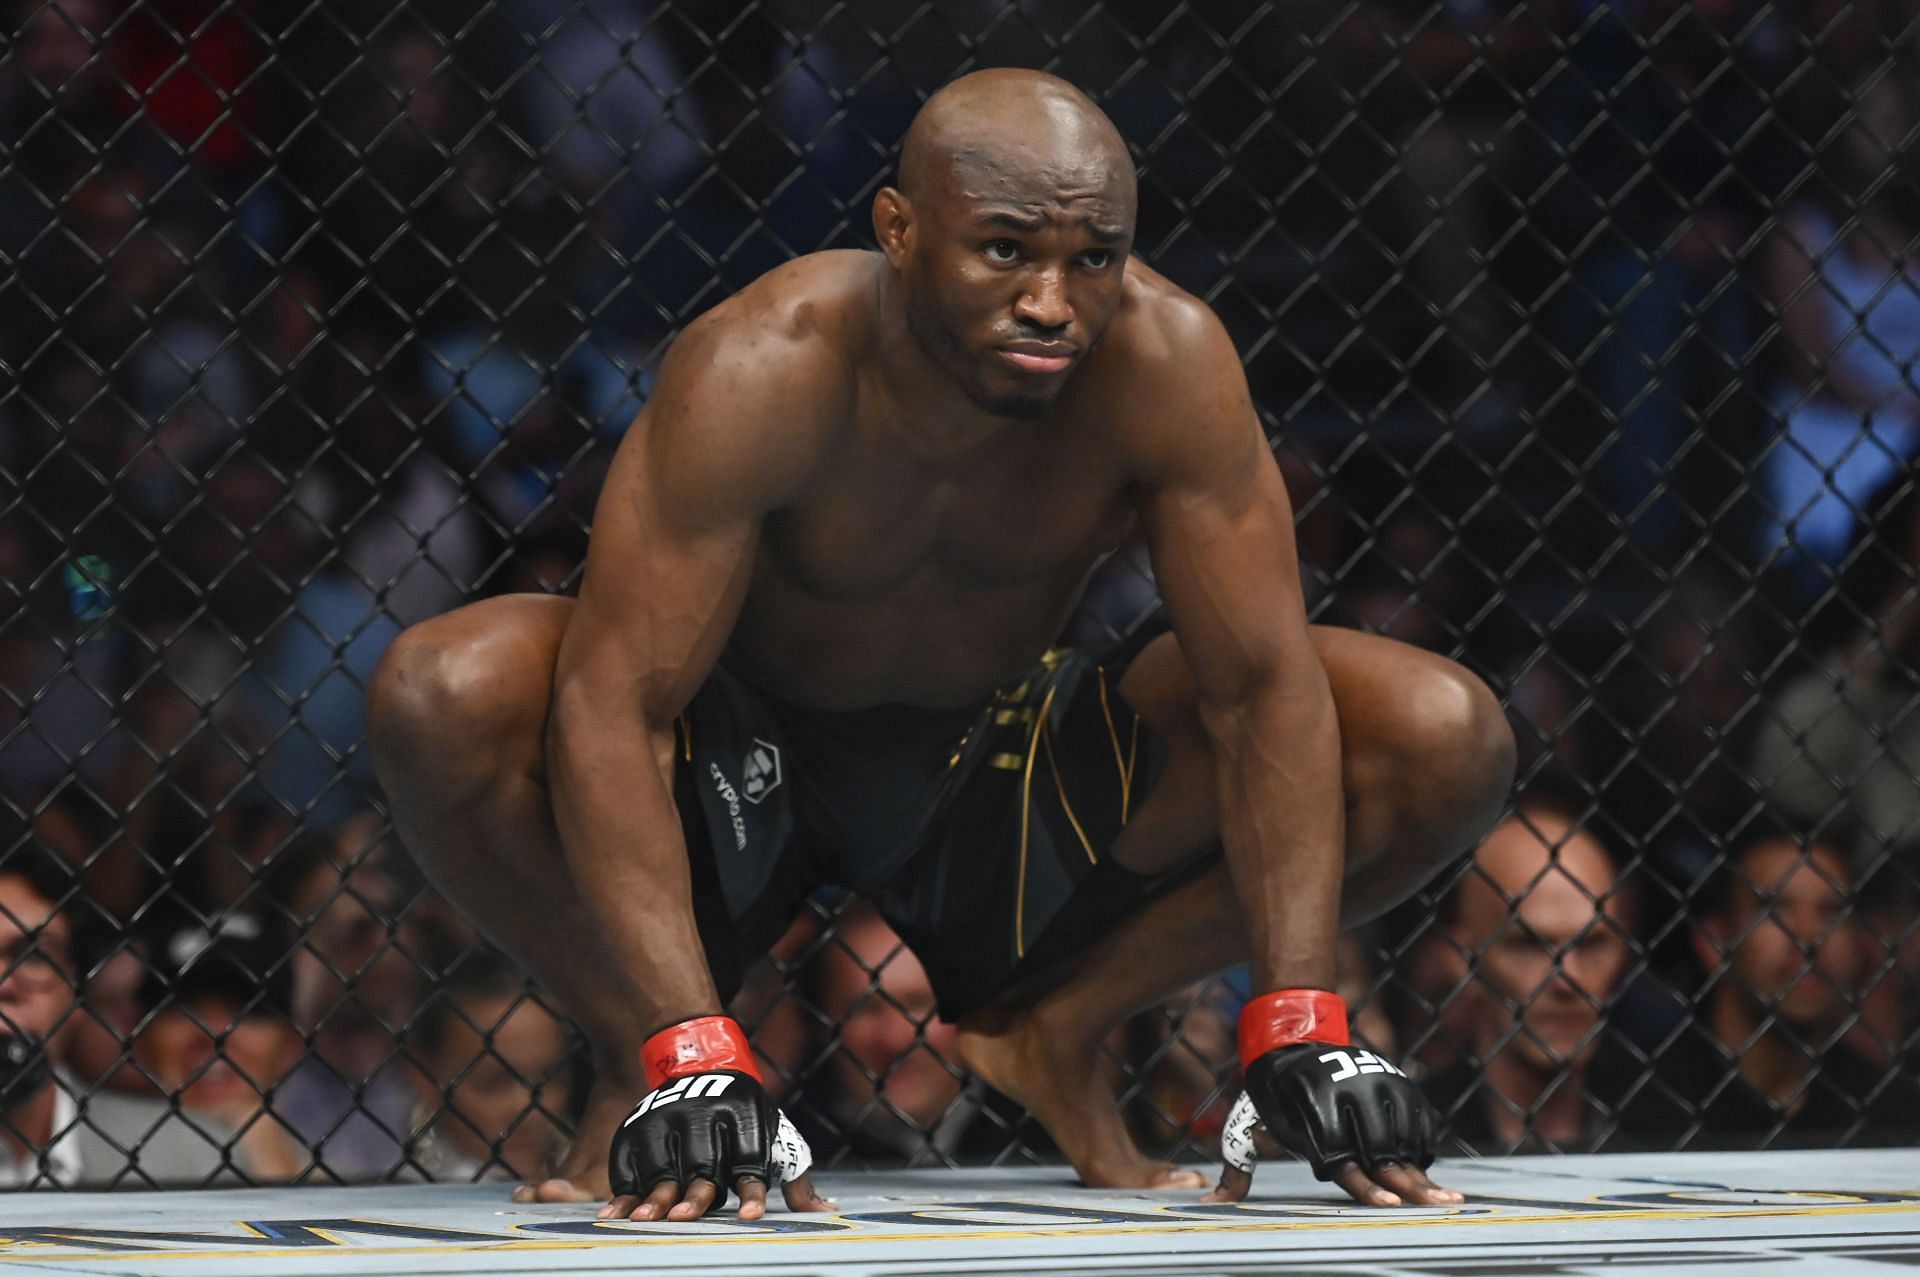 If he wants to surpass Georges St-Pierre, Kamaru Usman needs to win this weekend